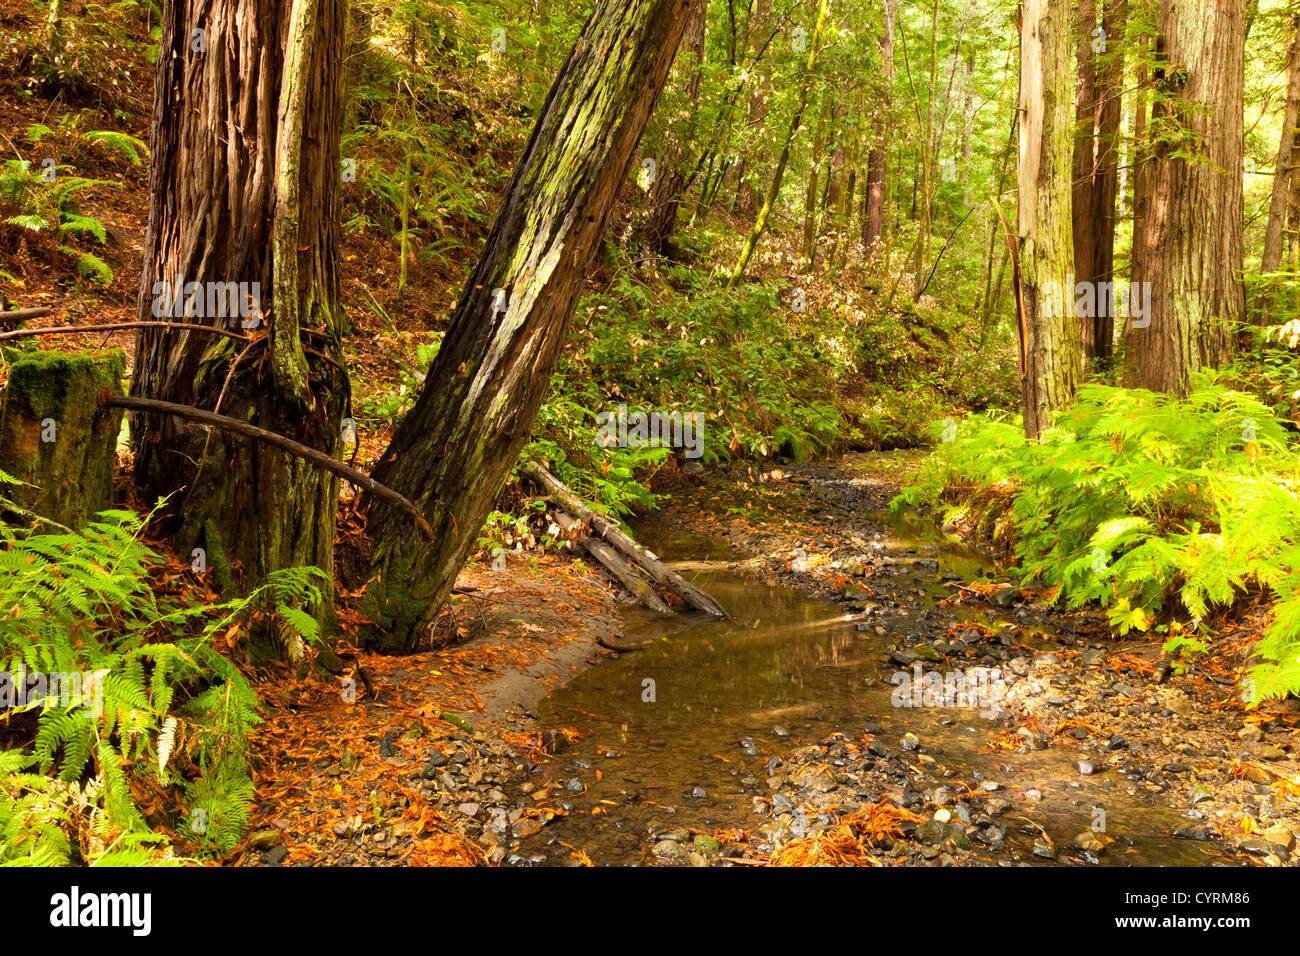 The primeval forest with the creek Stock Photo